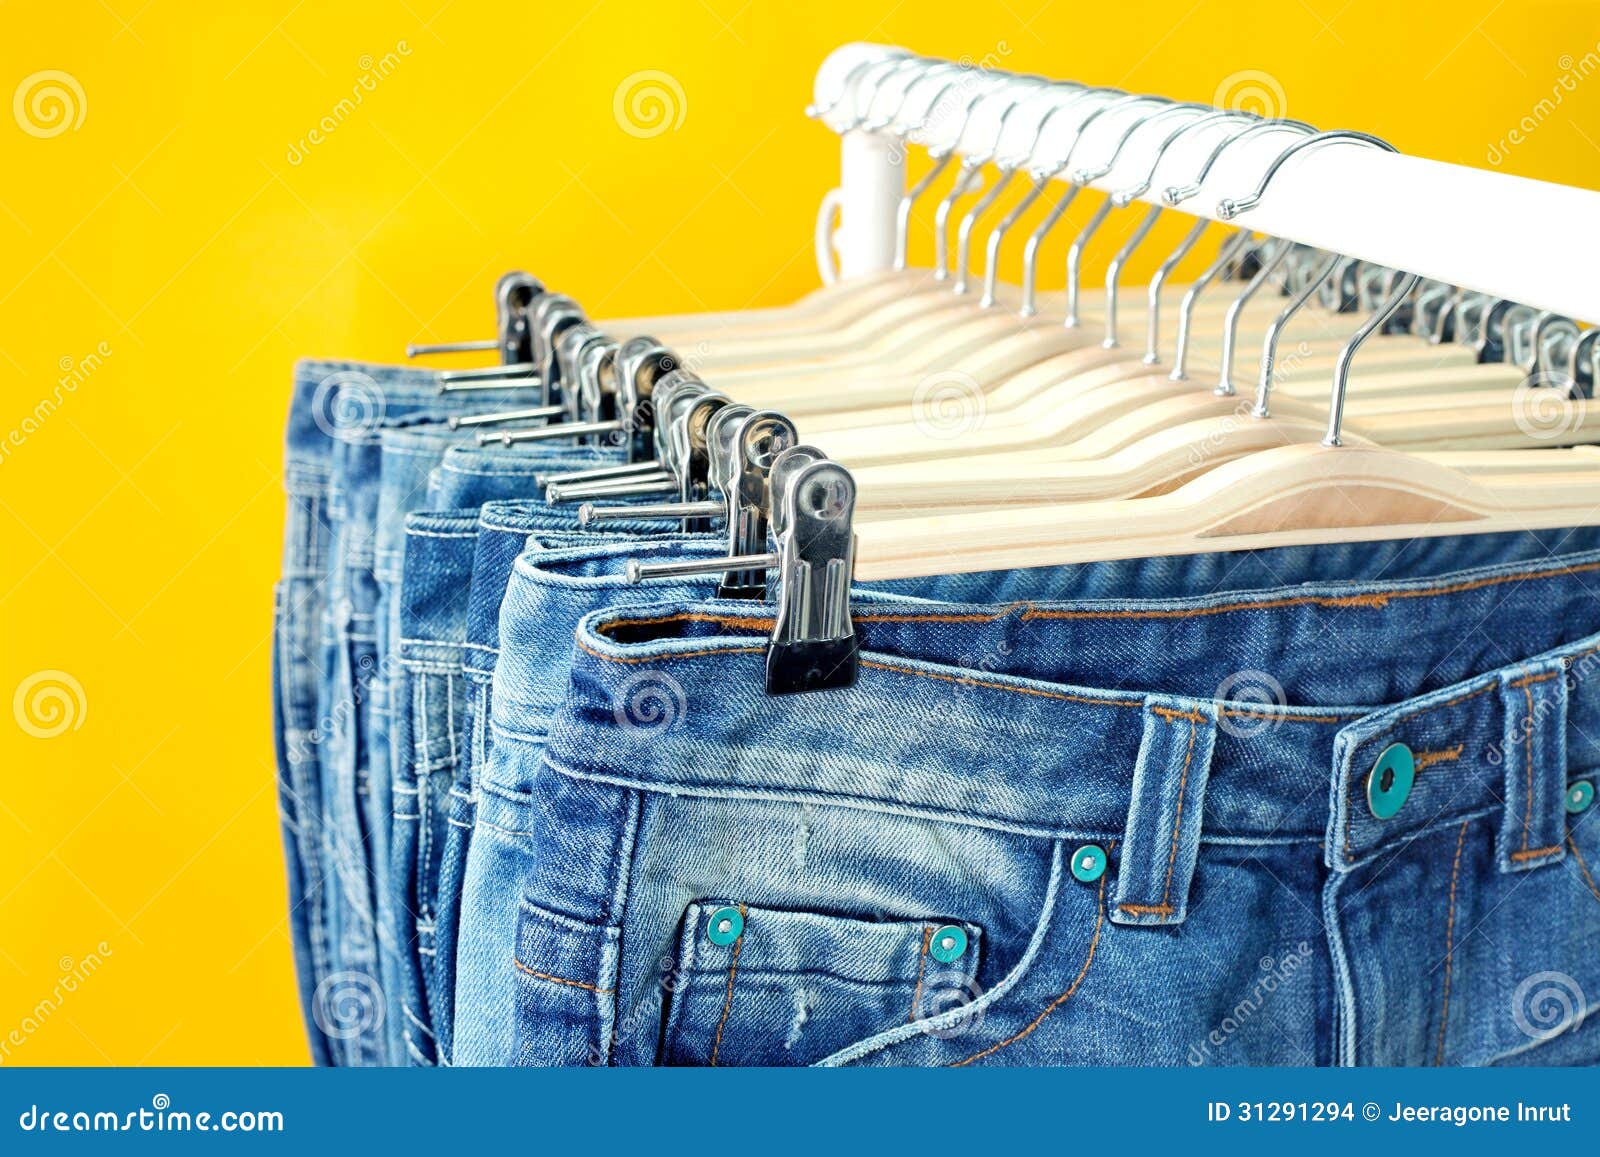 Row of hanged blue jeans stock photo. Image of business - 31291294